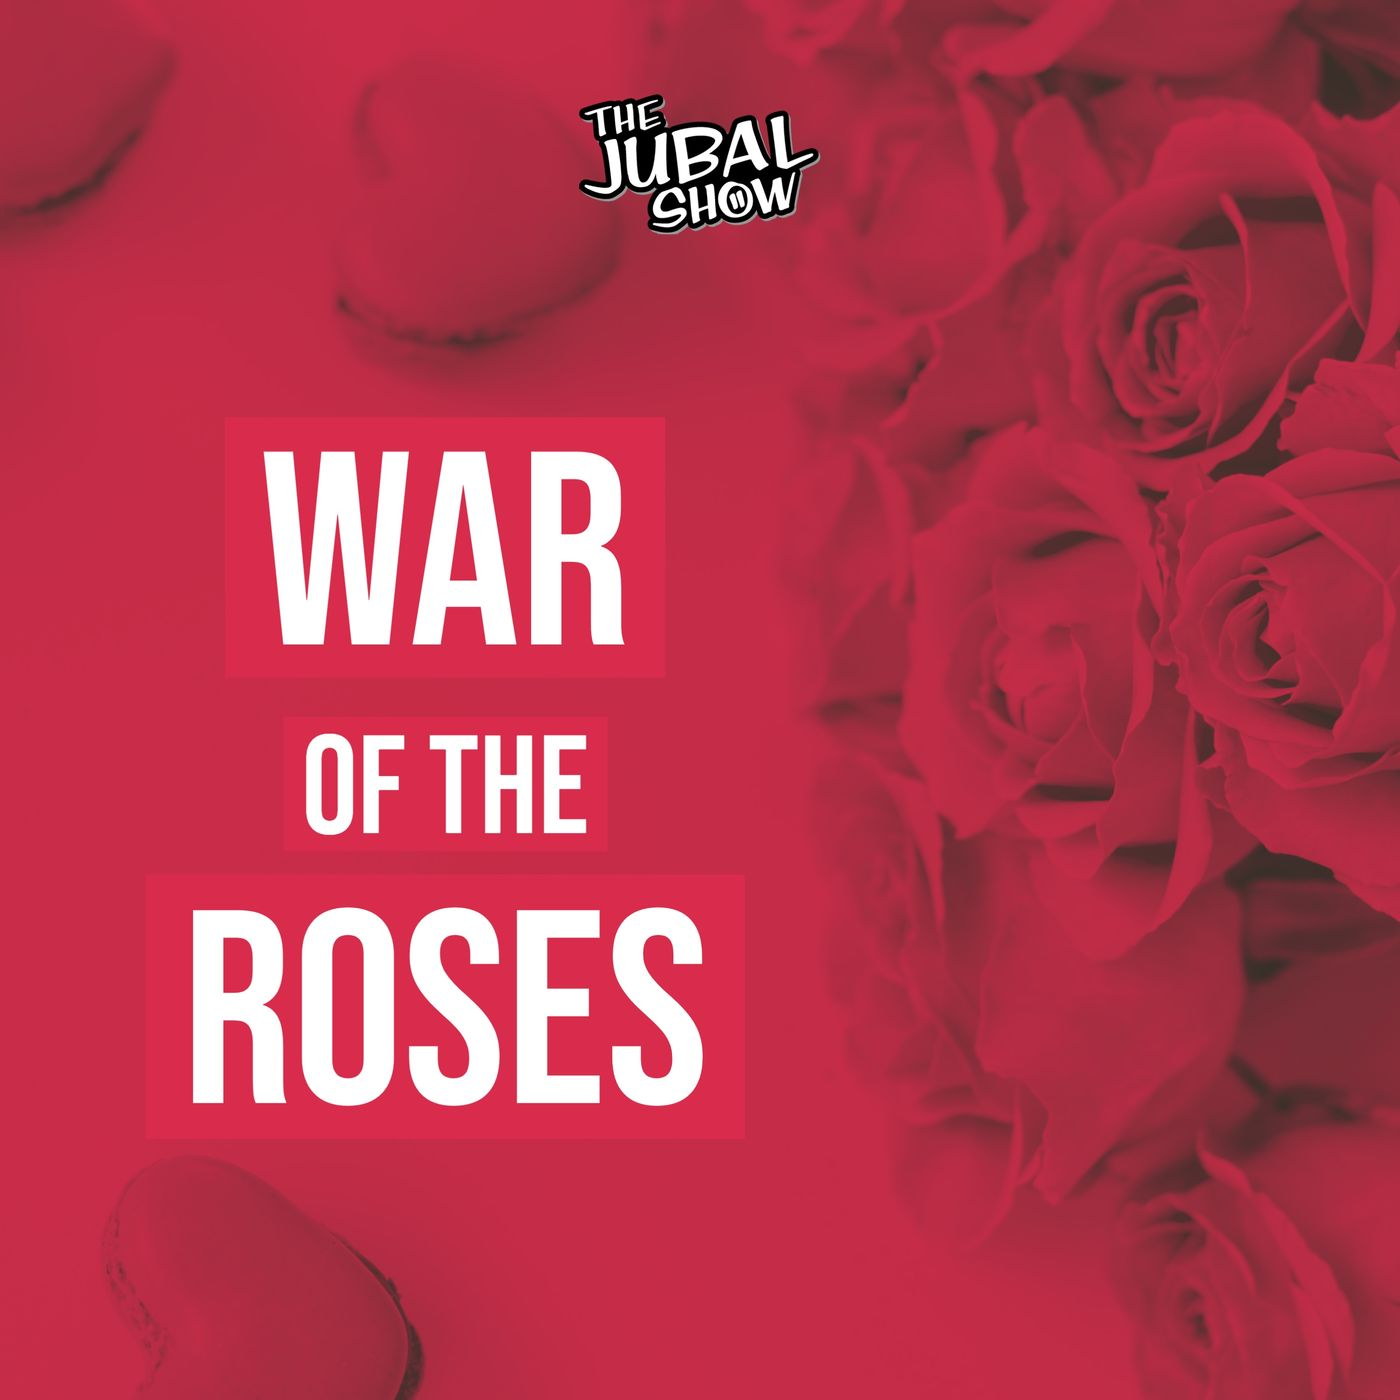 The Jubal Show has that Punch, Drunk, Love in this War Of The Roses!